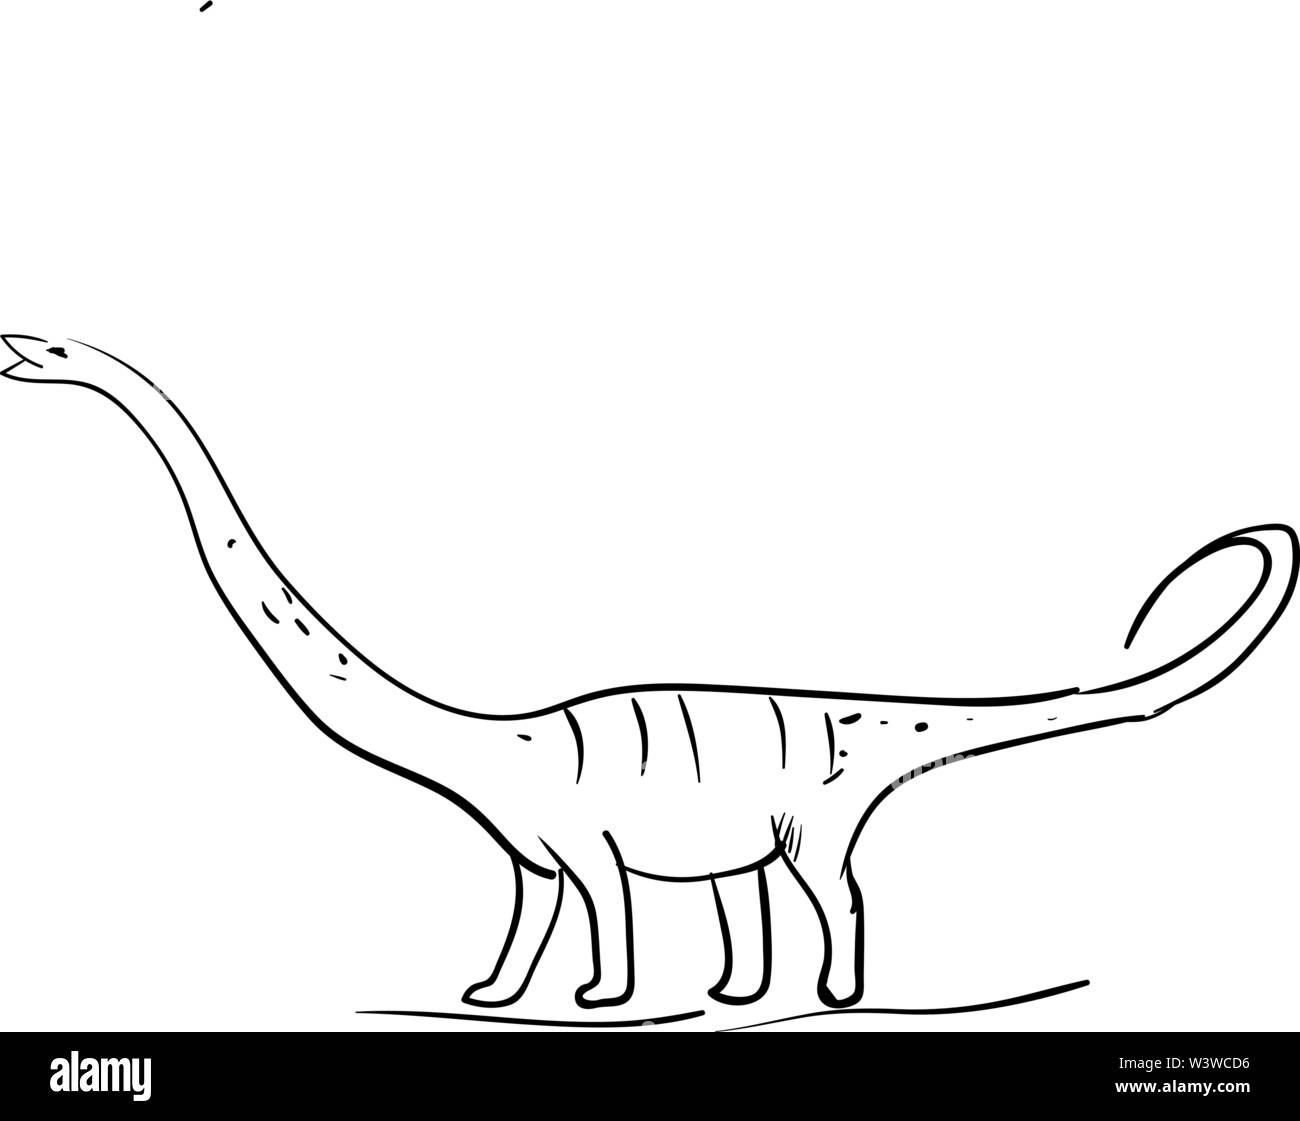 Long neck dinosaur black and white stock photos images